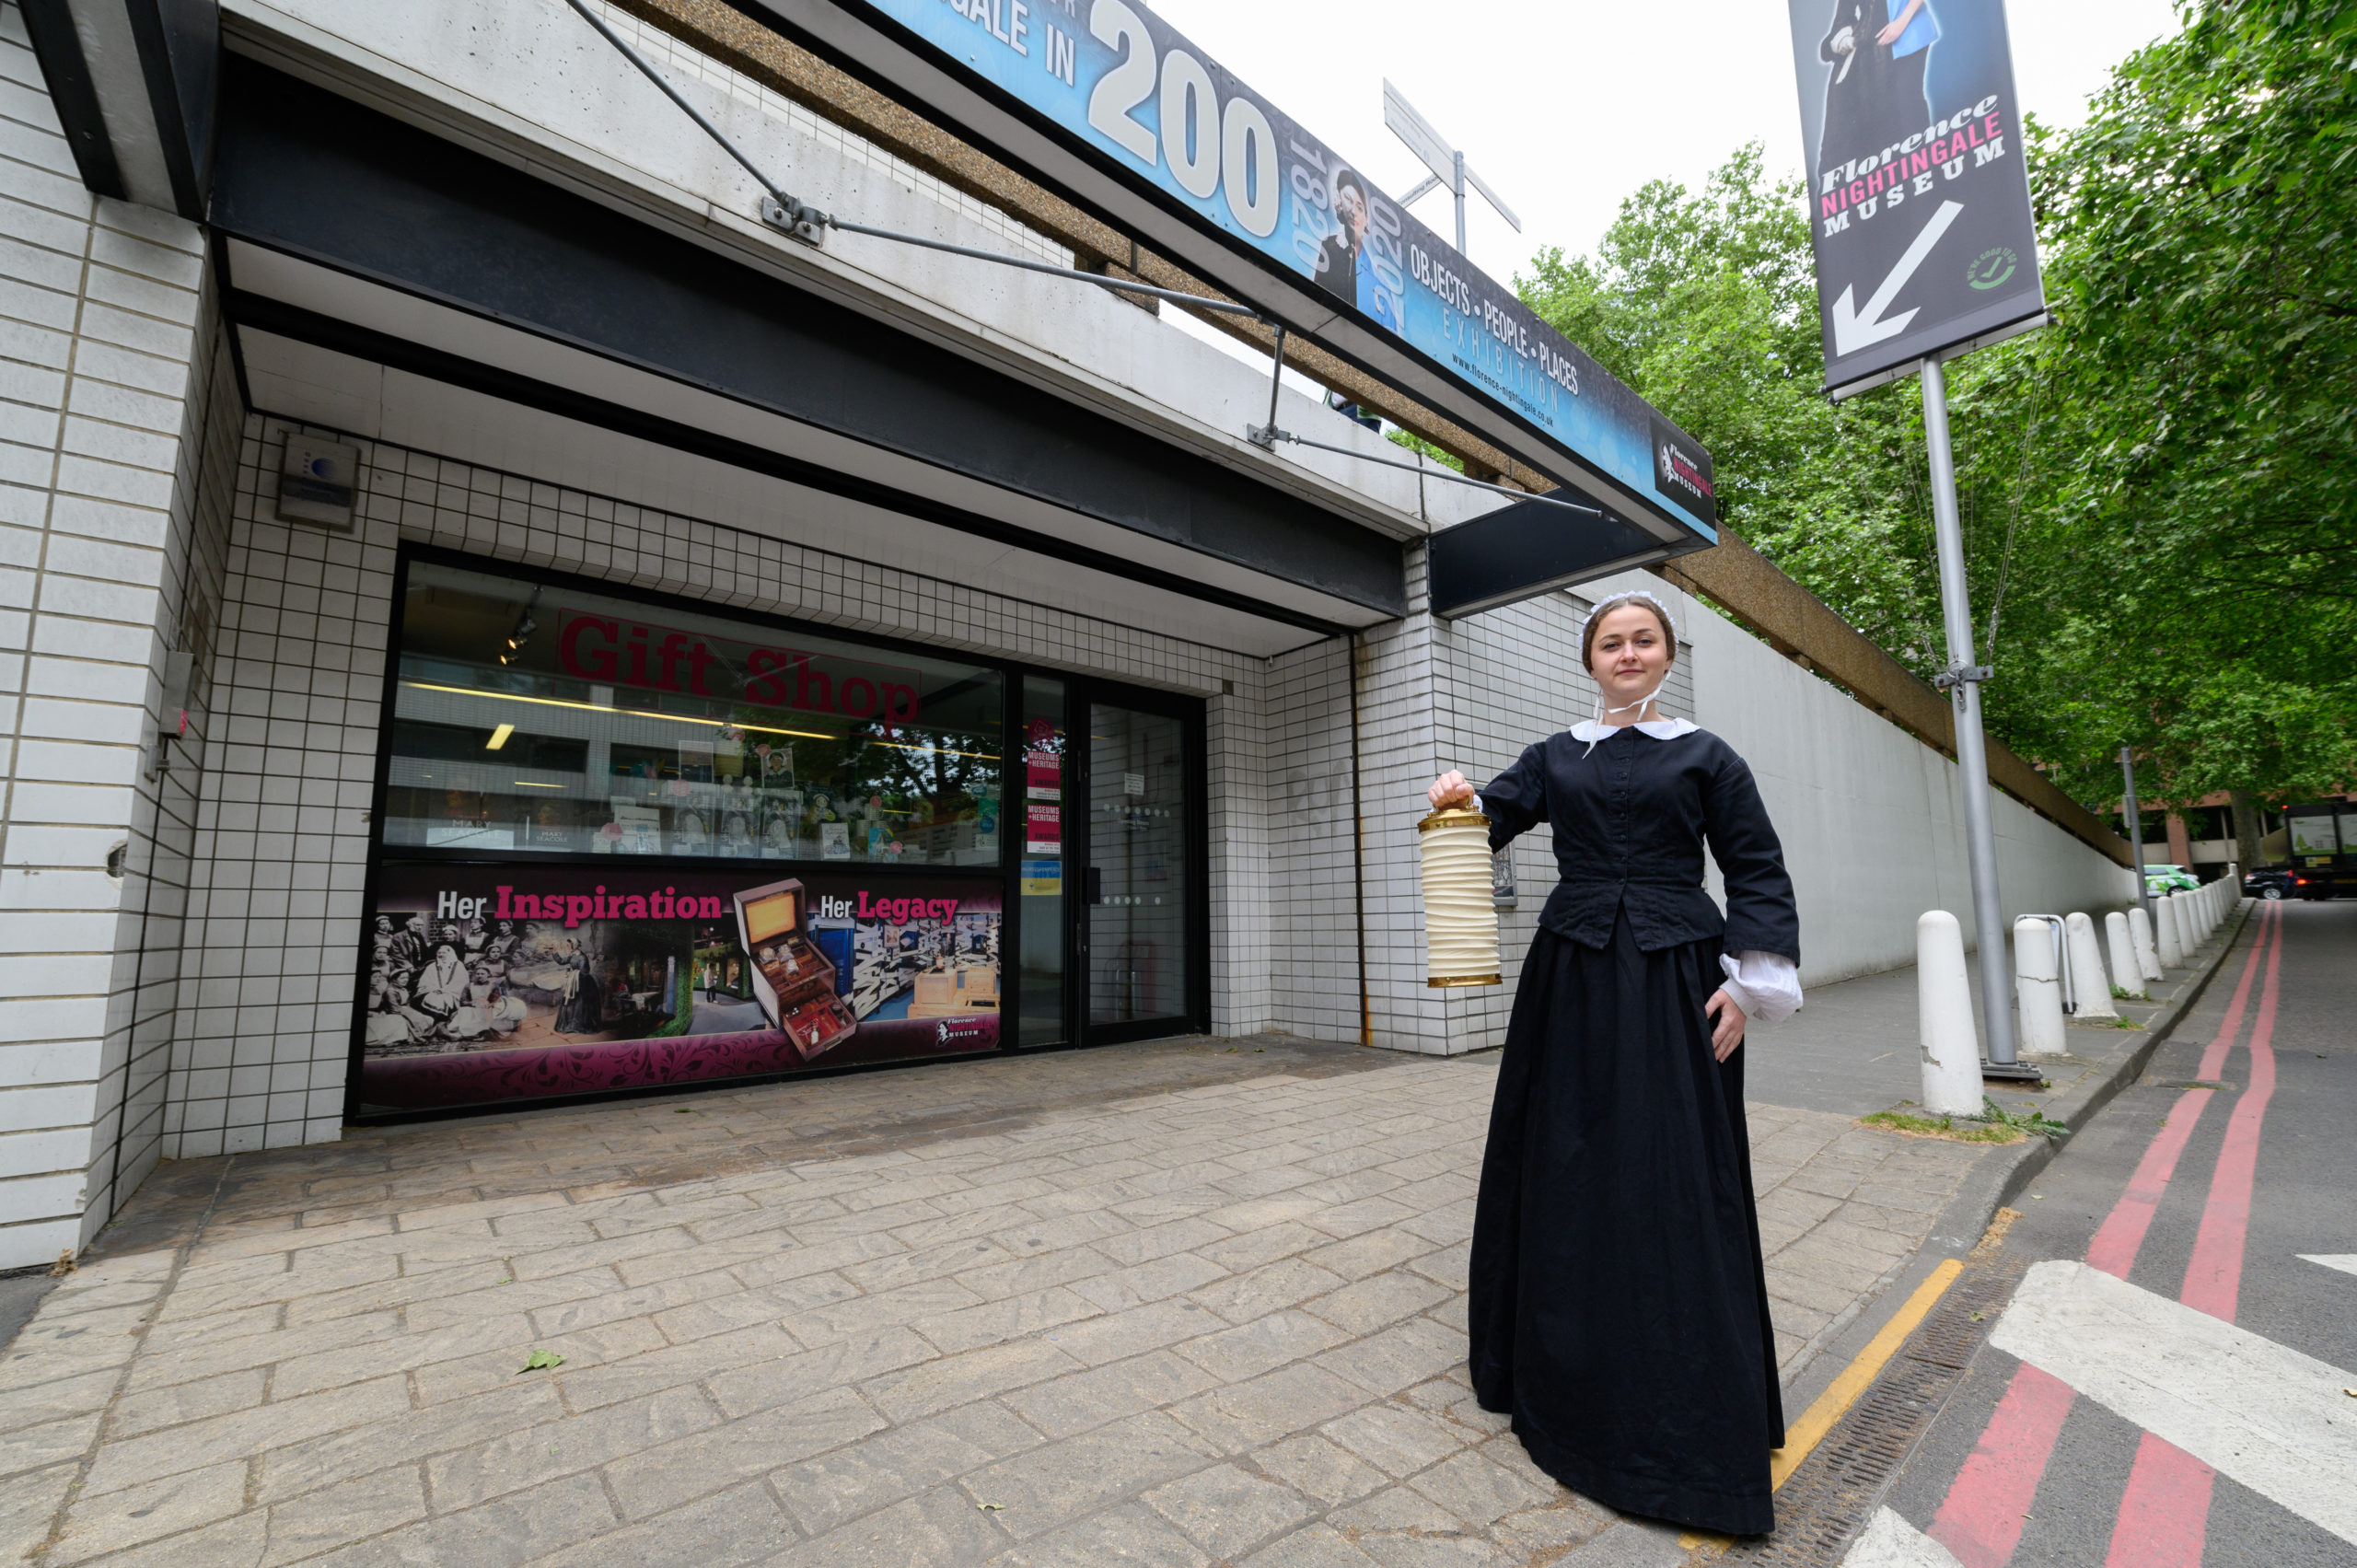 Florence Nightingale performer posing beside the Museum entrance. She holds a lamp out towards the camera.